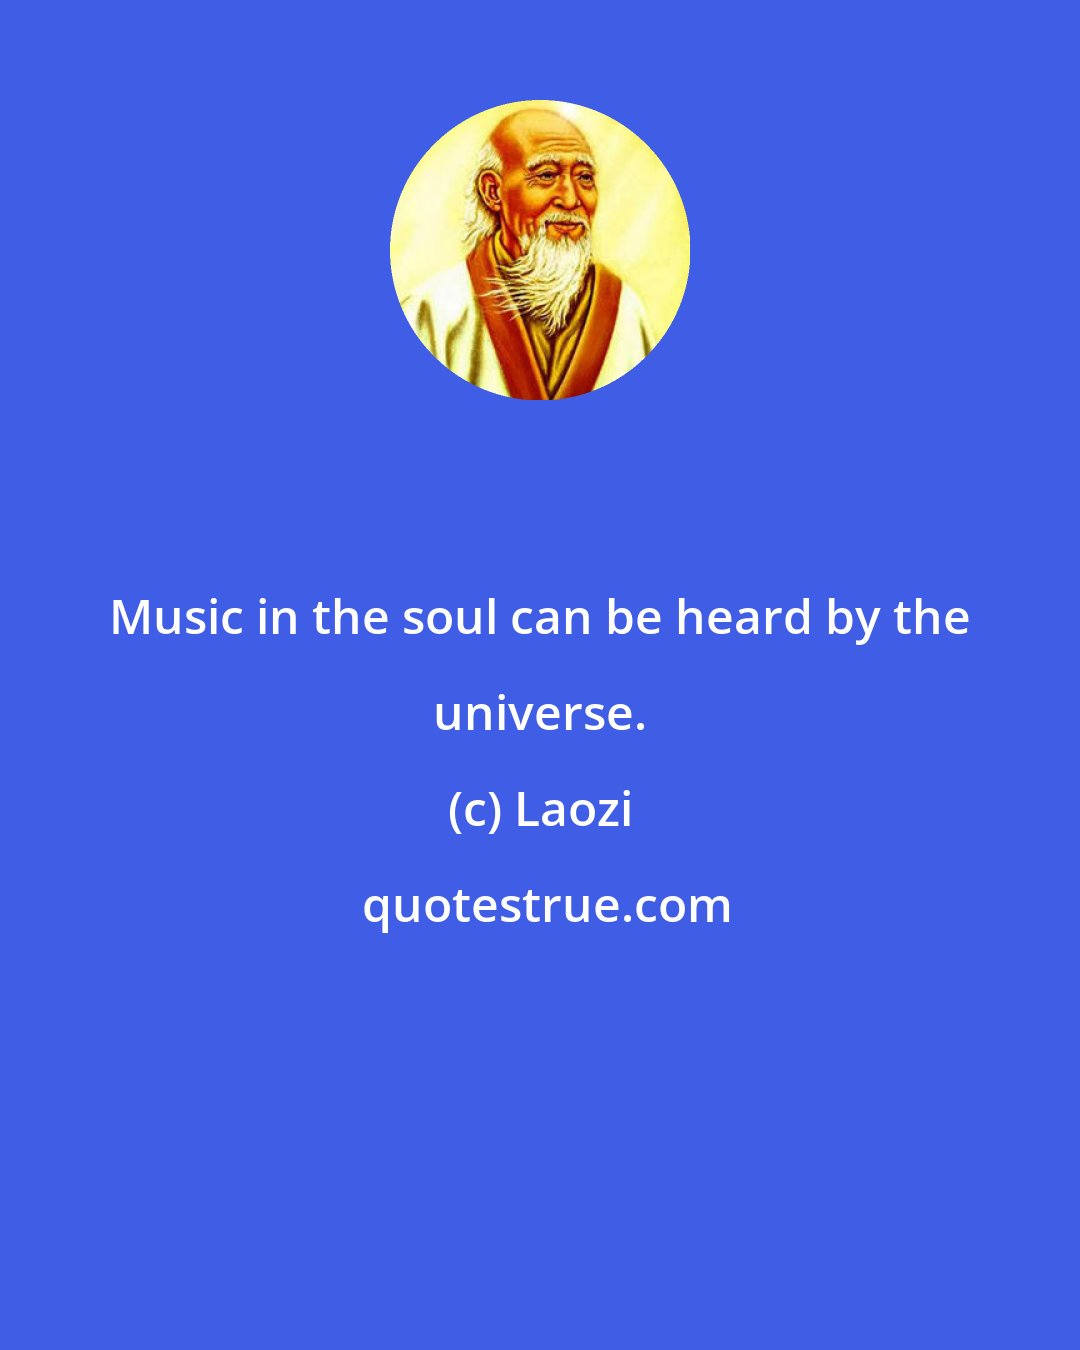 Laozi: Music in the soul can be heard by the universe.